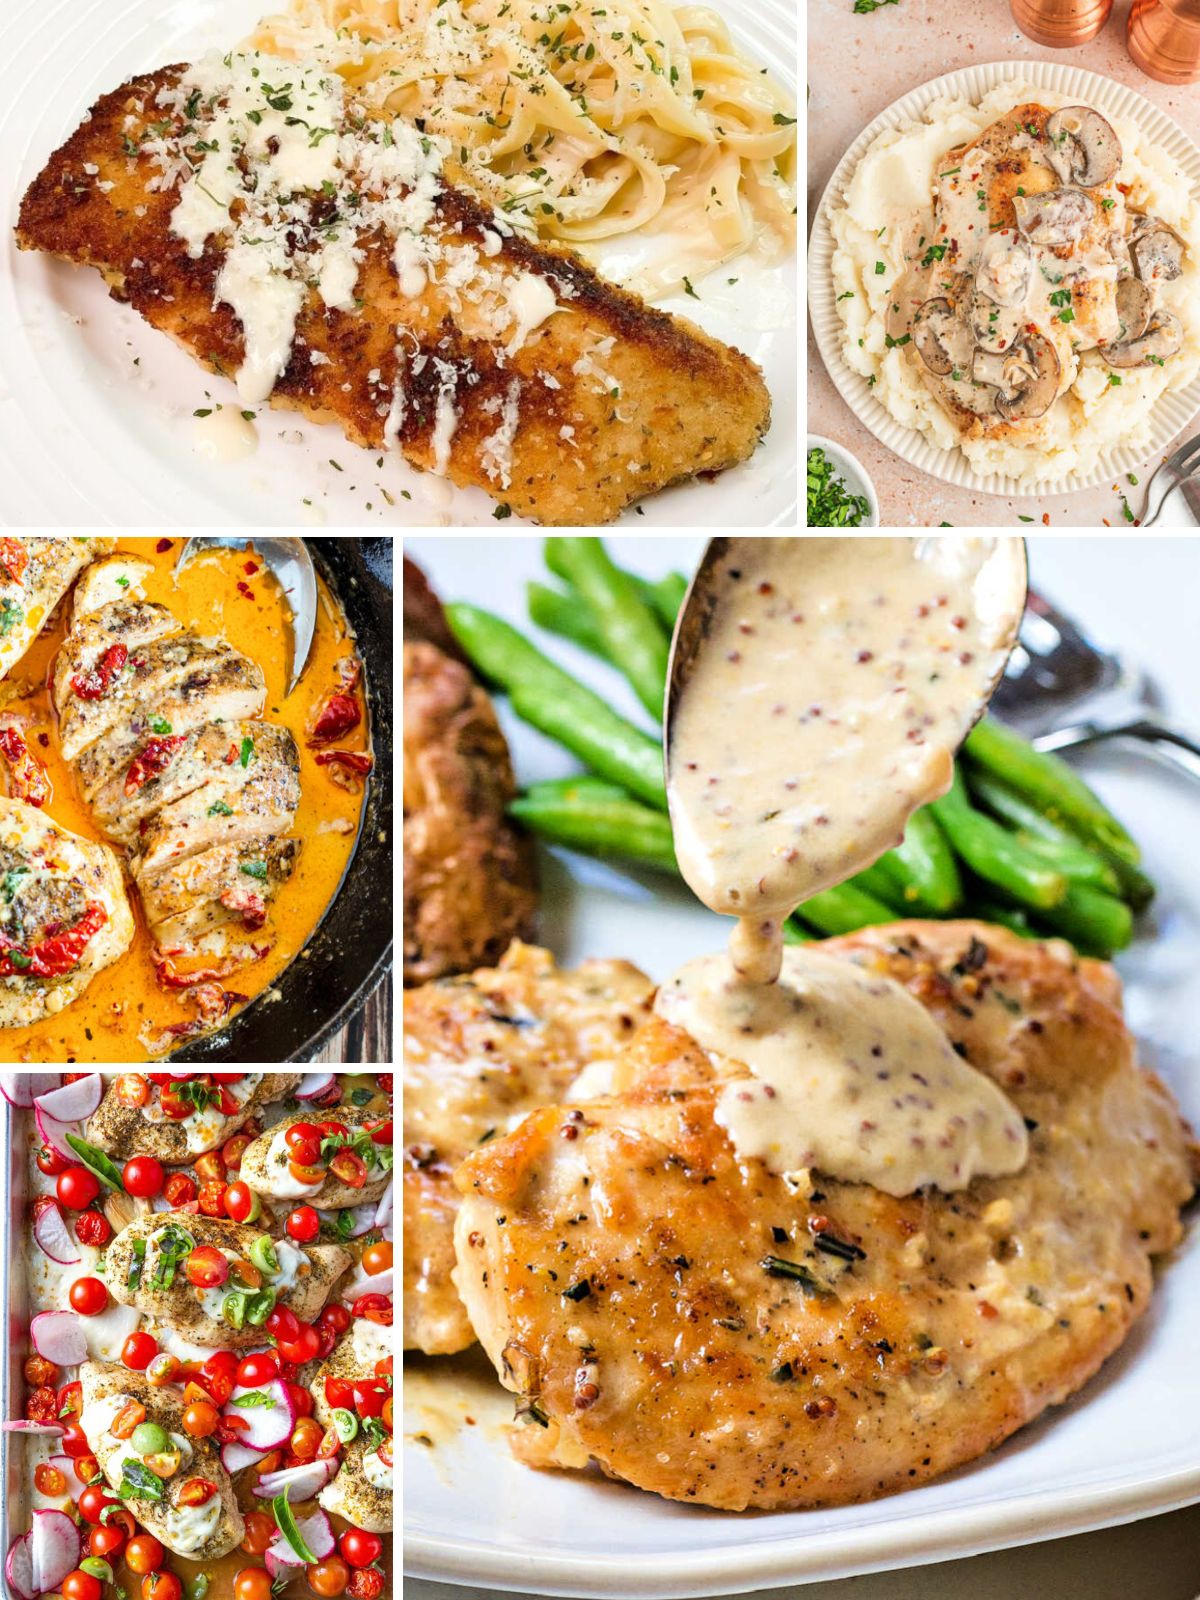 One pan chicken cutlet recipes collection.